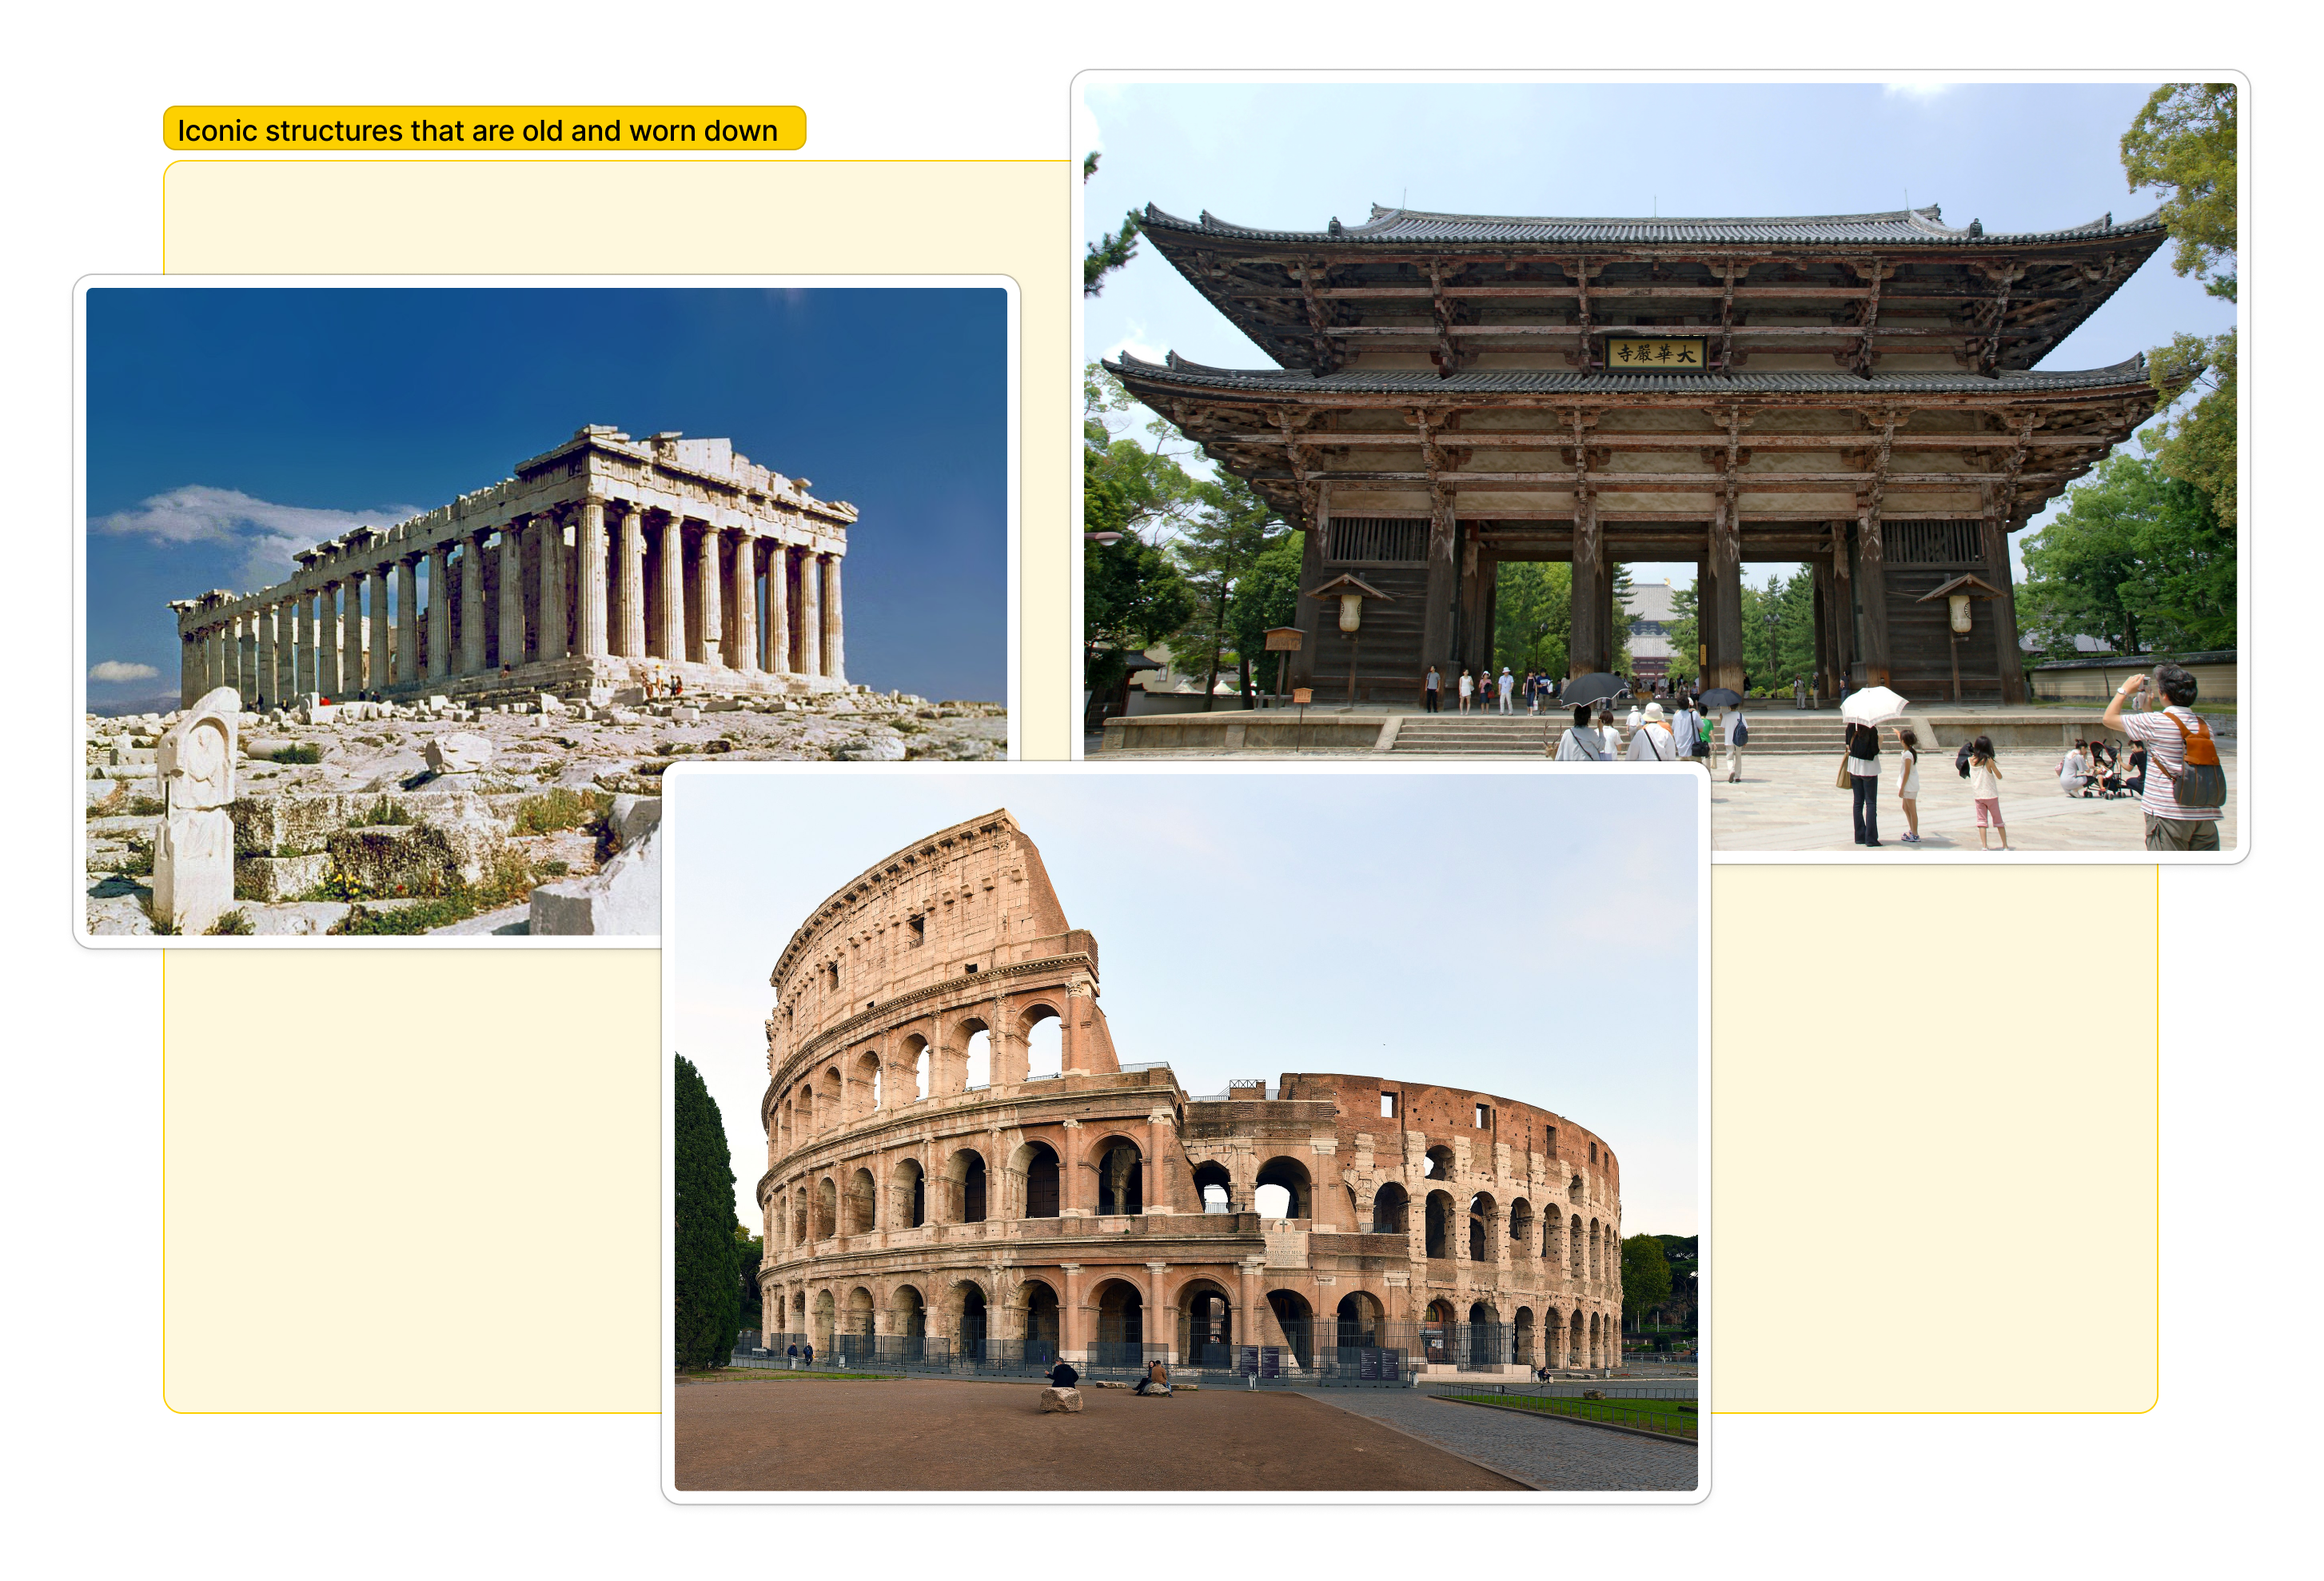 Photo collage of iconic structures that are old and worn down: The Parthenon, Nandaimon, and the Colosseo